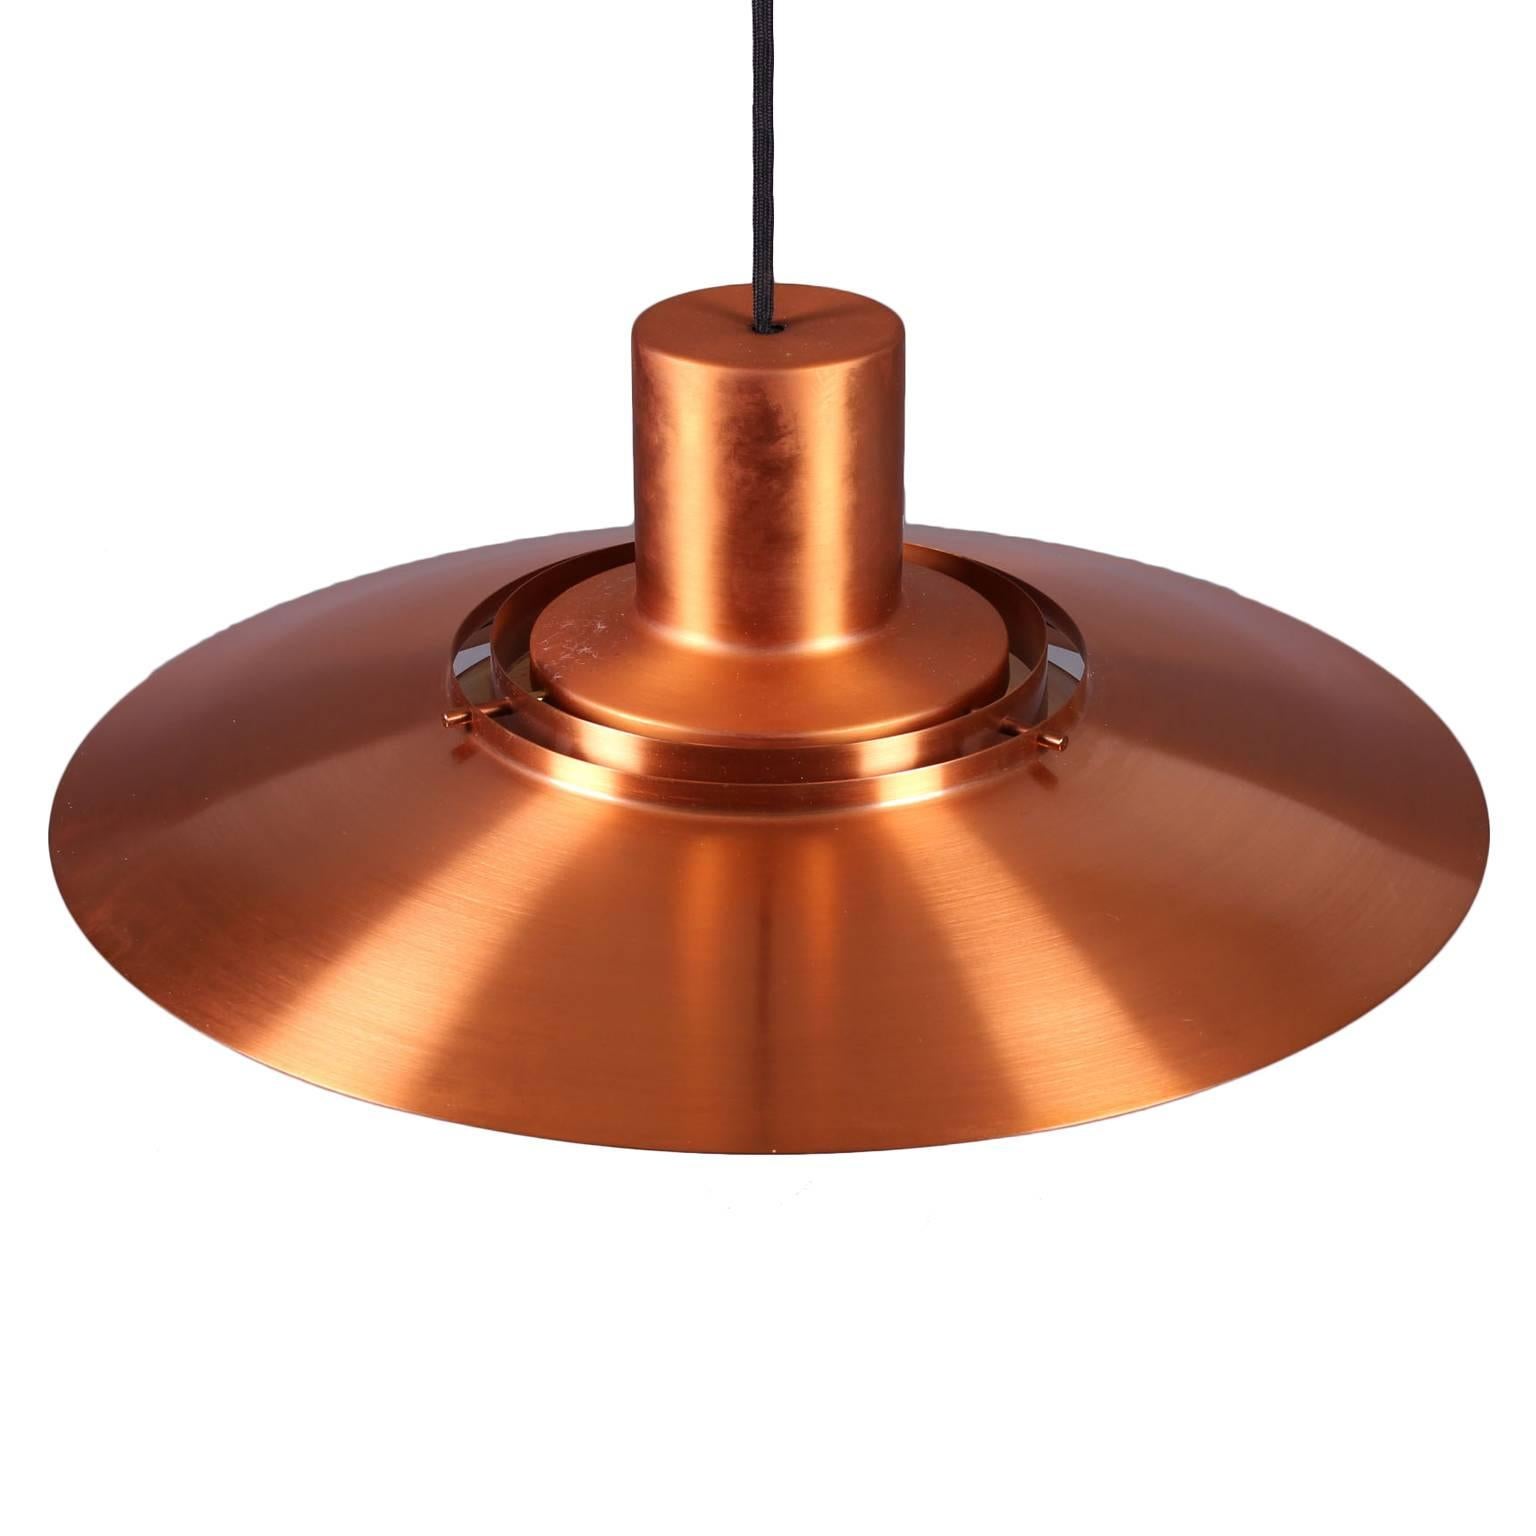 Offerd by Zitzo, Amsterdam. This pendant produced by Nordisk Solar company in Denmark, designed 1963.
Measures: H 20 cm, diameter 47,5 cm.
Material: Copper.

Literature: Product catalogue Nordisk Solar

Shipping services: Ask for our competitive